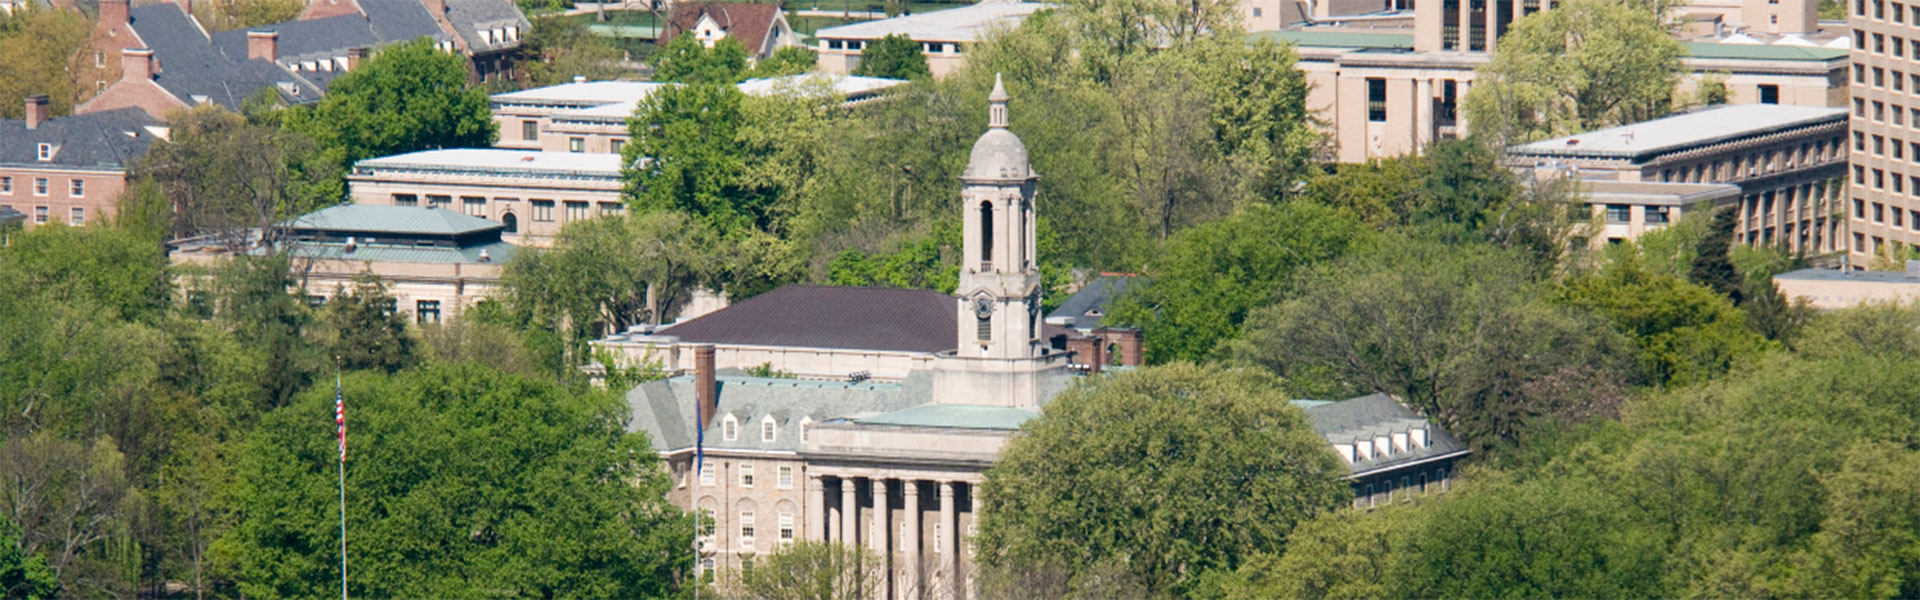 Old Main Aerial View